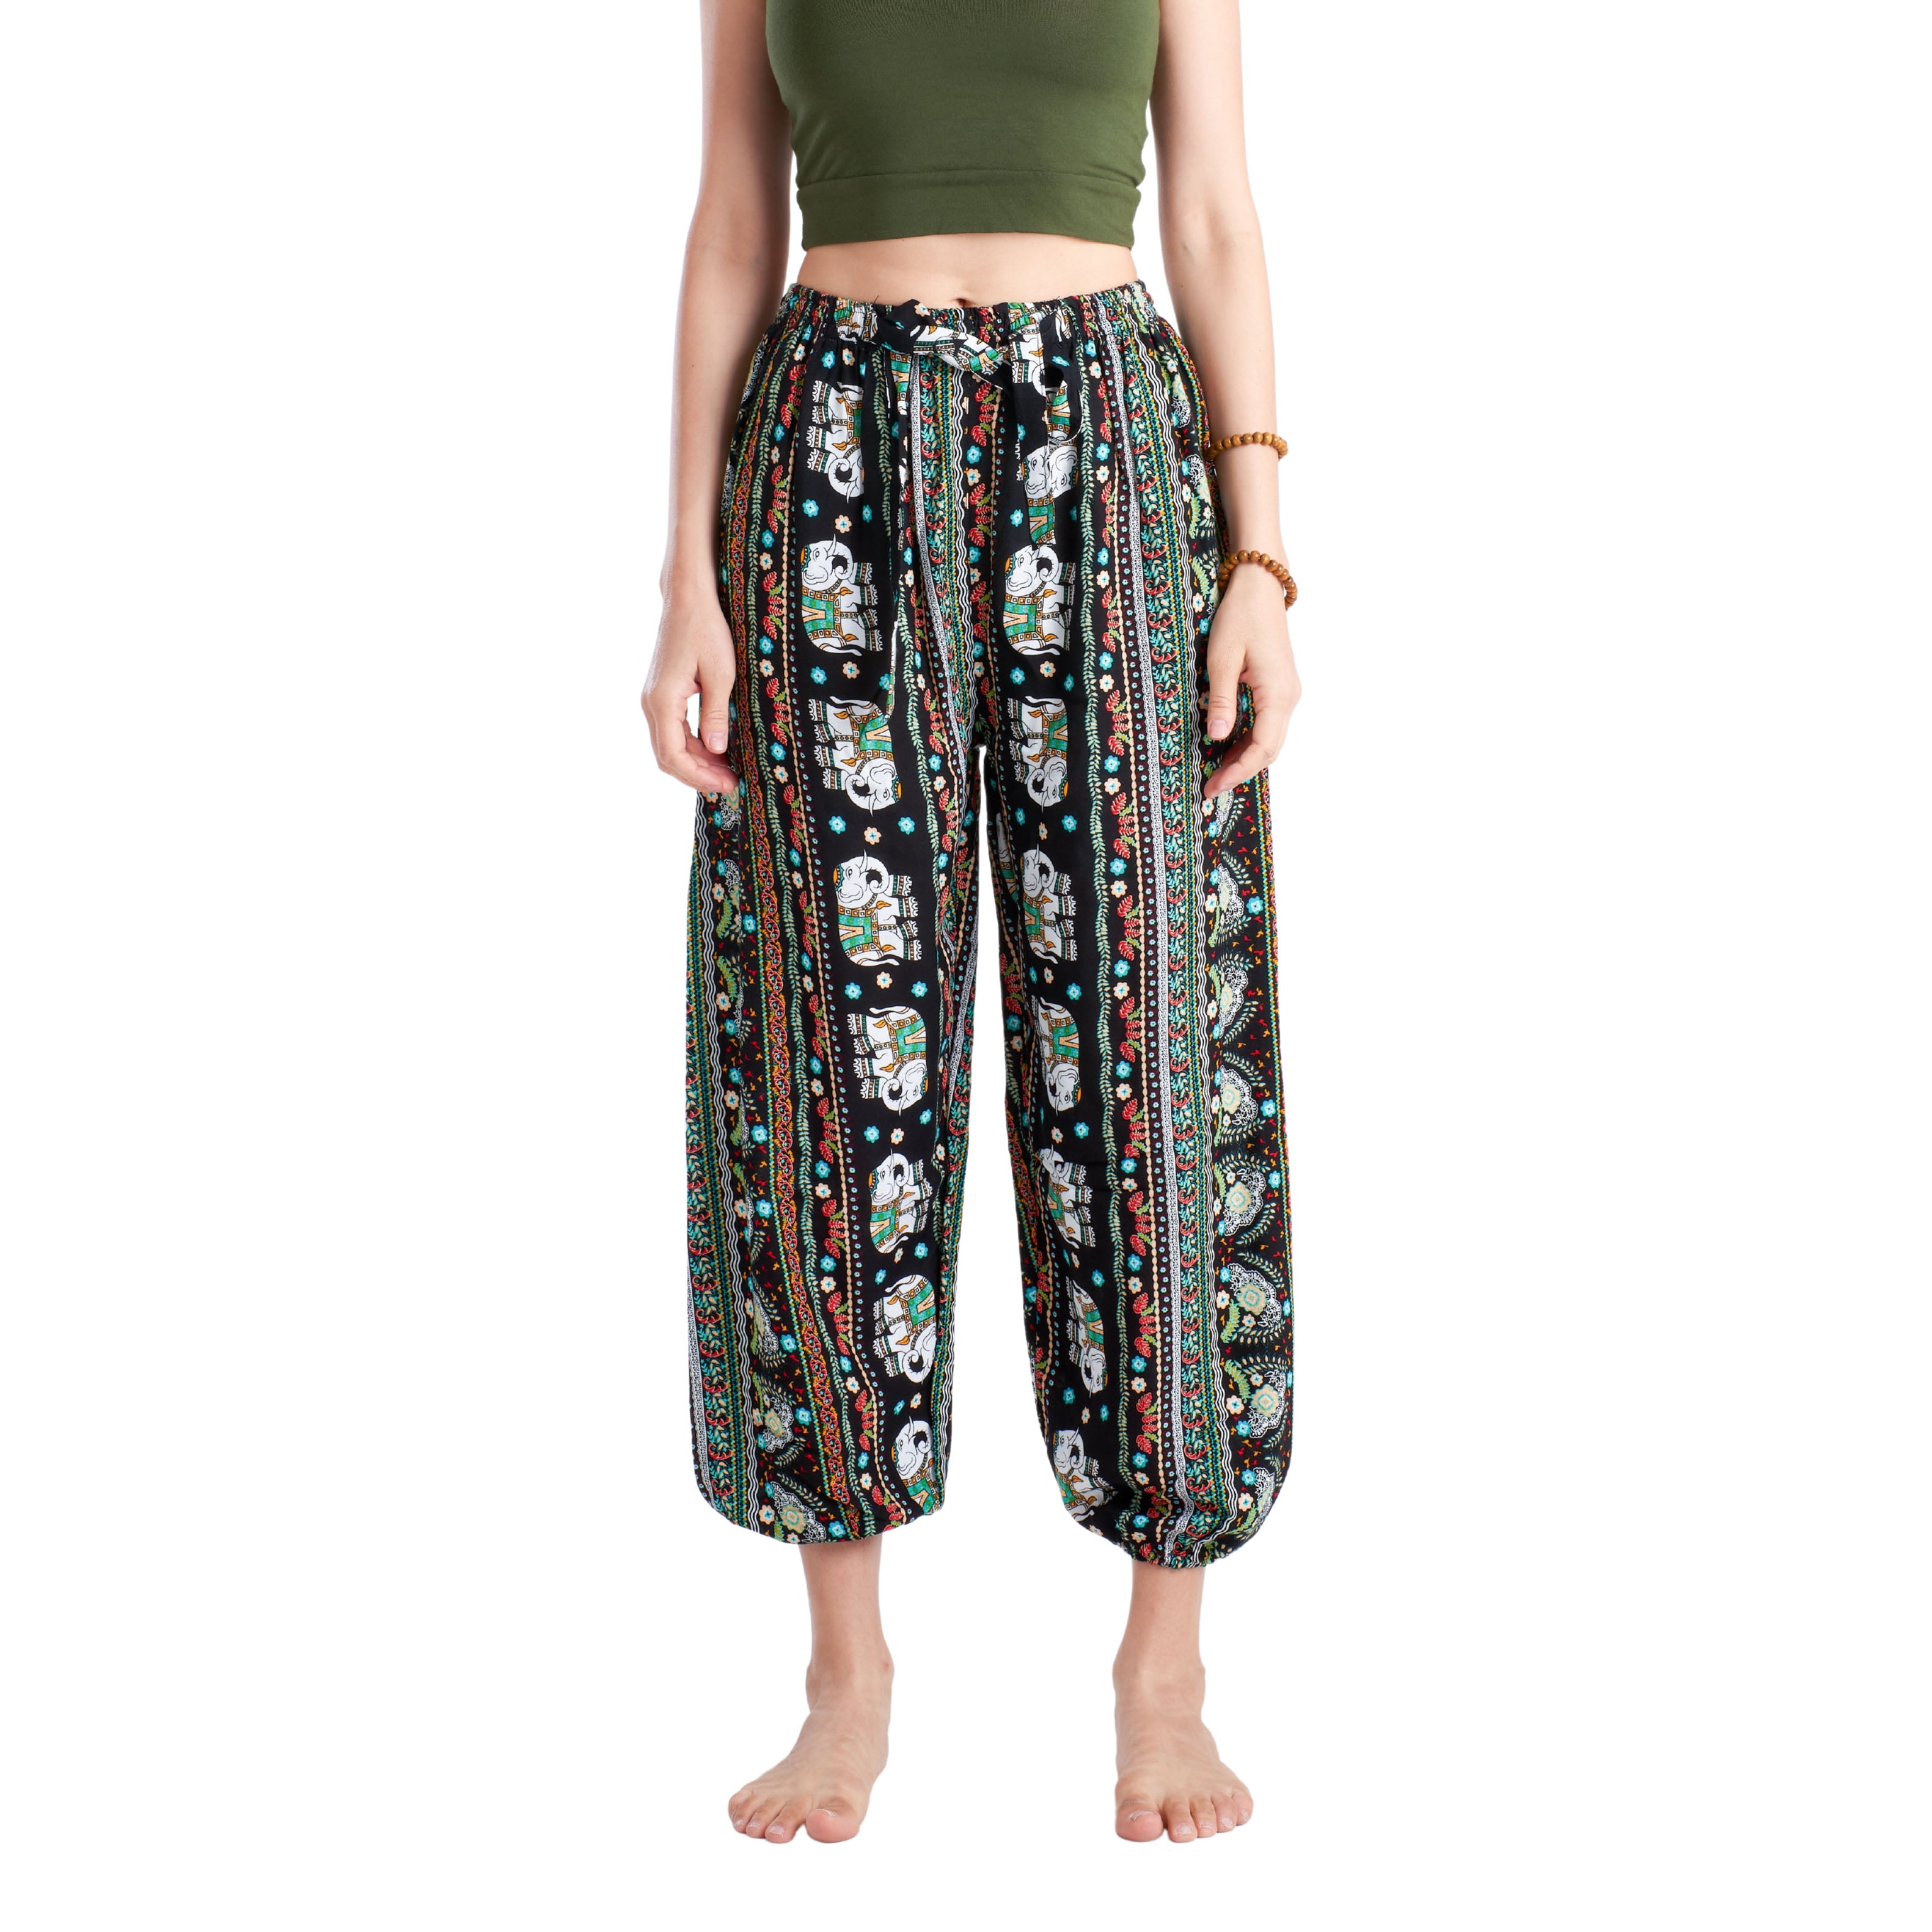 NOMADE PANTS - Drawstring Elepanta Drawstring Pants - Buy Today Elephant Pants Jewelry And Bohemian Clothes Handmade In Thailand Help To Save The Elephants FairTrade And Vegan